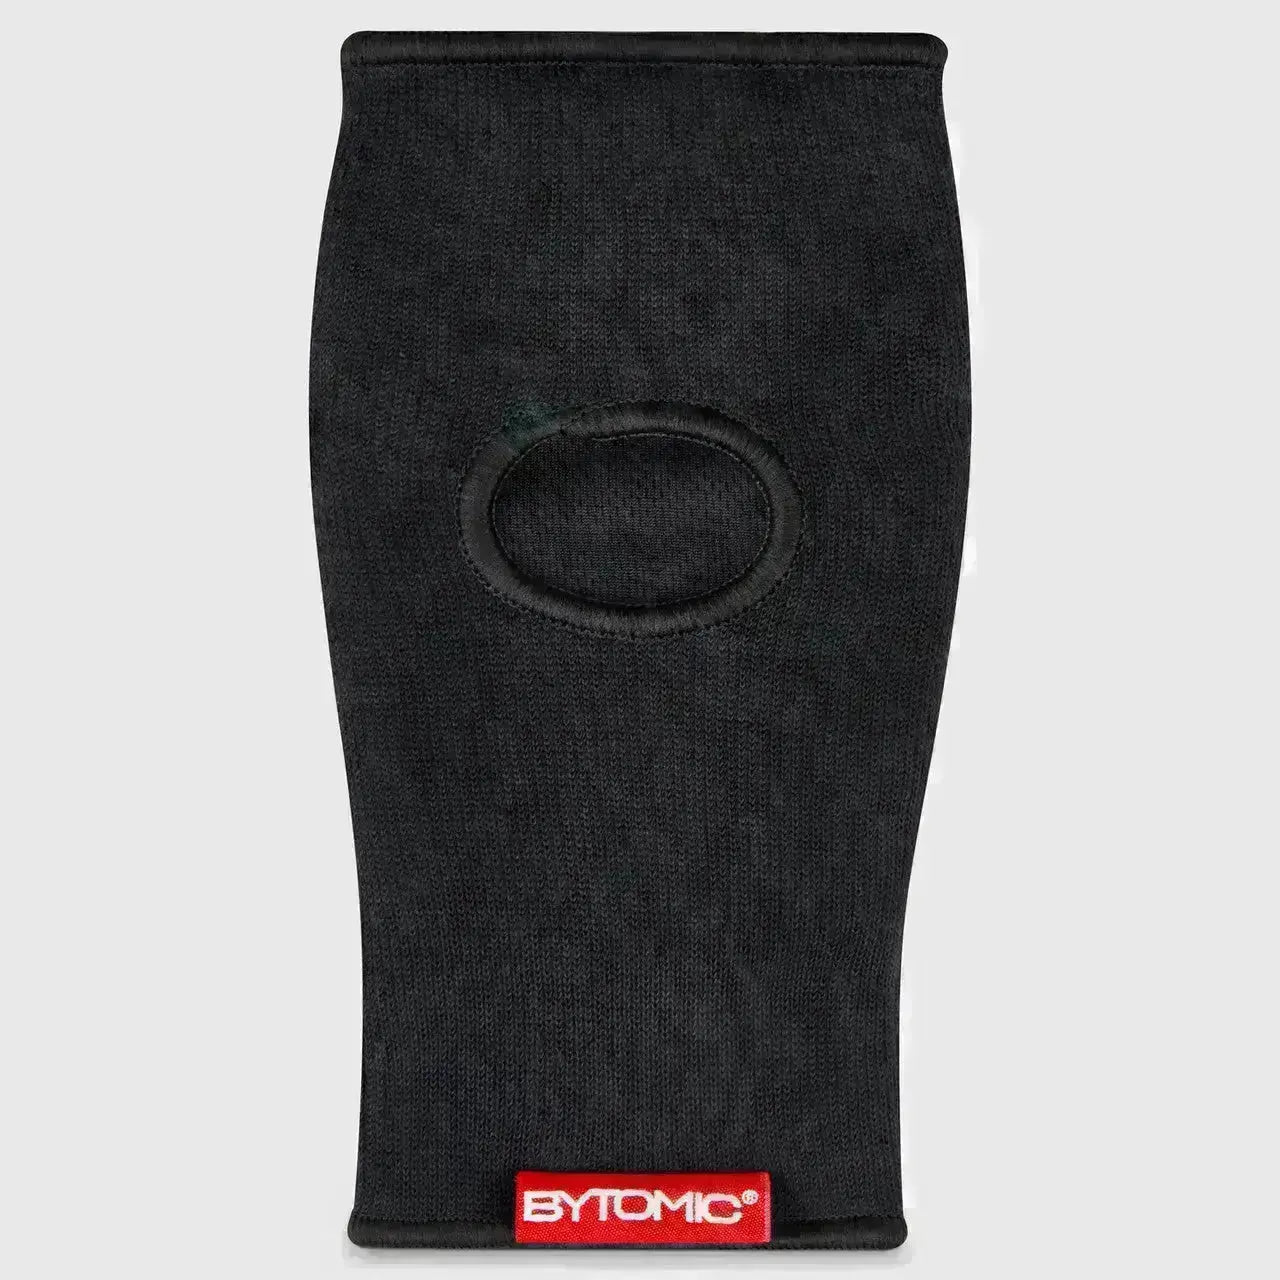 Bytomic Red Label Elasticated Cloth Hand Guard  Fight Co